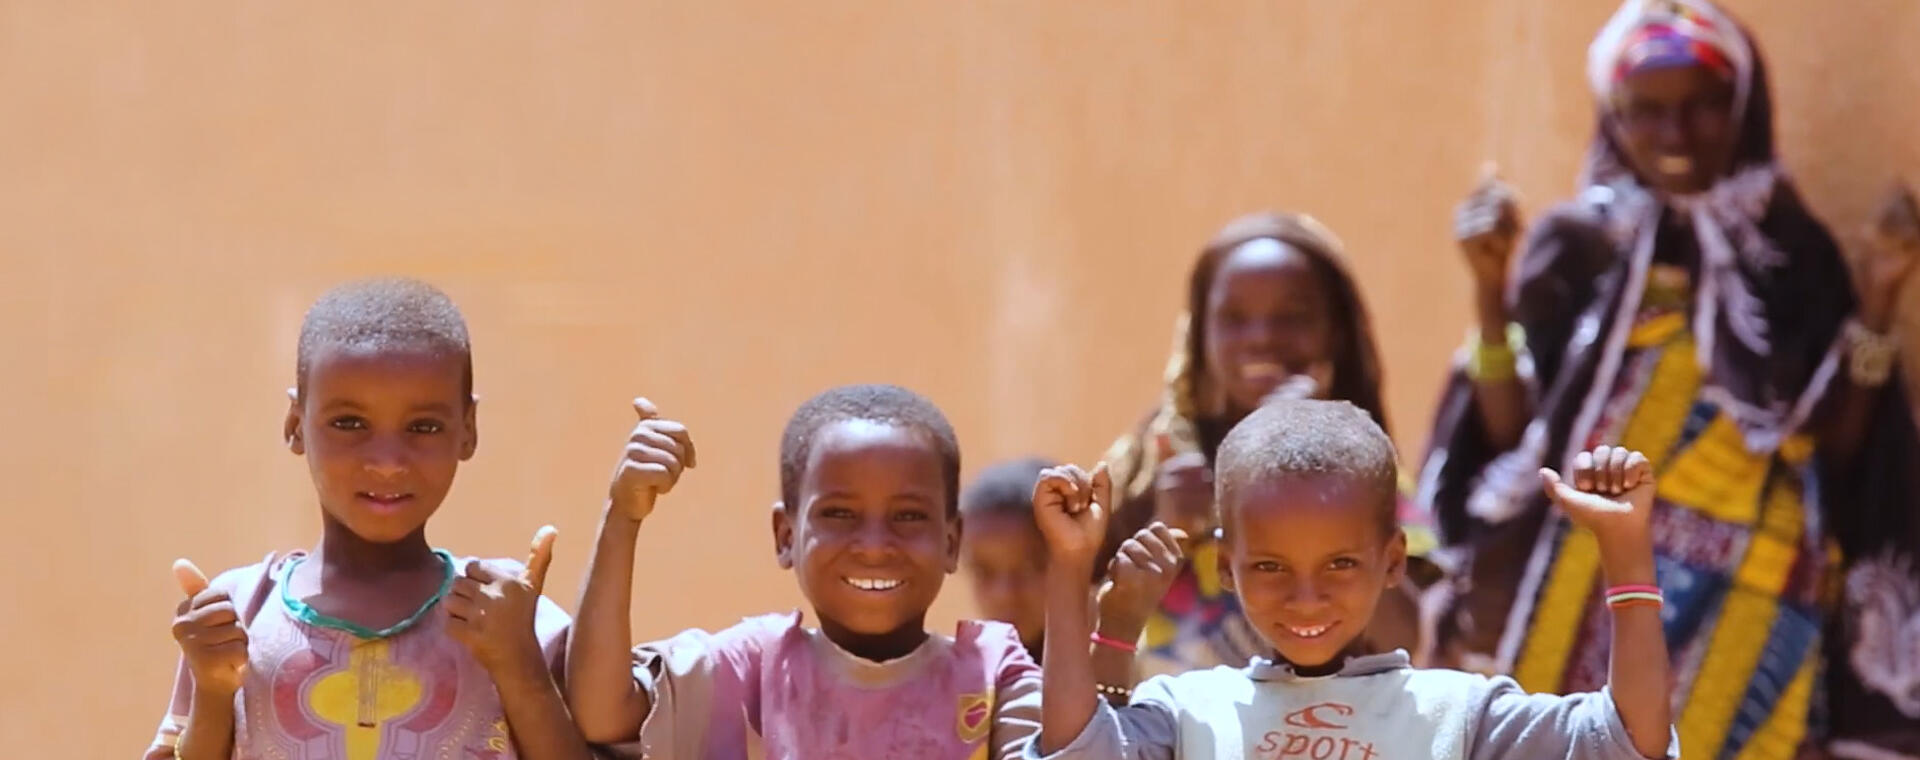 Niger's Maison du Paysan: A Center for Resilience